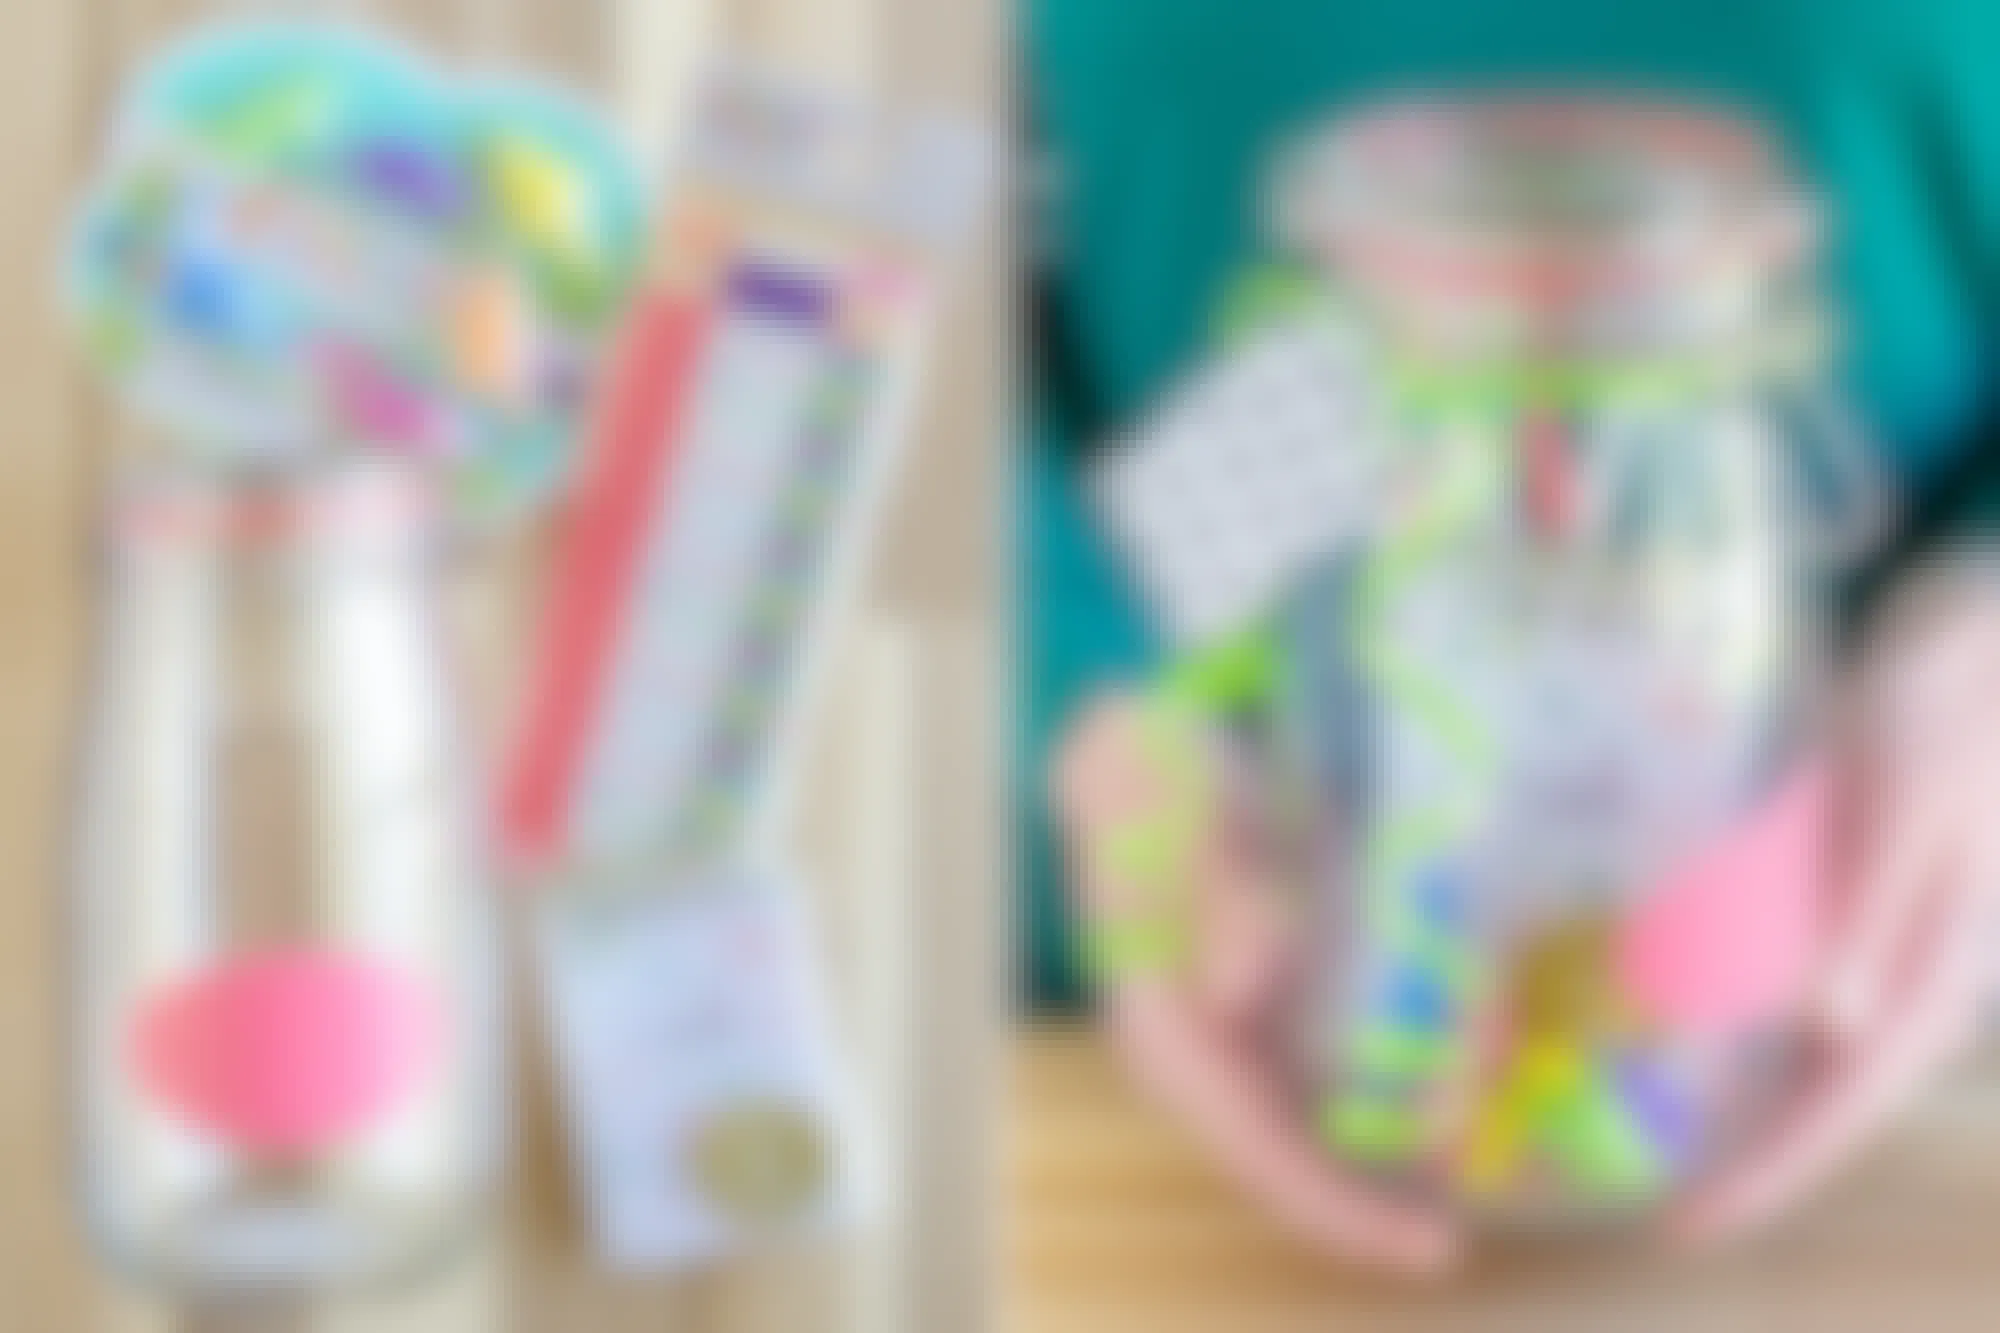 Two images; one with a jar and pencils, small notepad and dinosaur erasers, the second image has a person holding the jar with all of the items inside with a ribbon tied around the top of the jar with a tag.